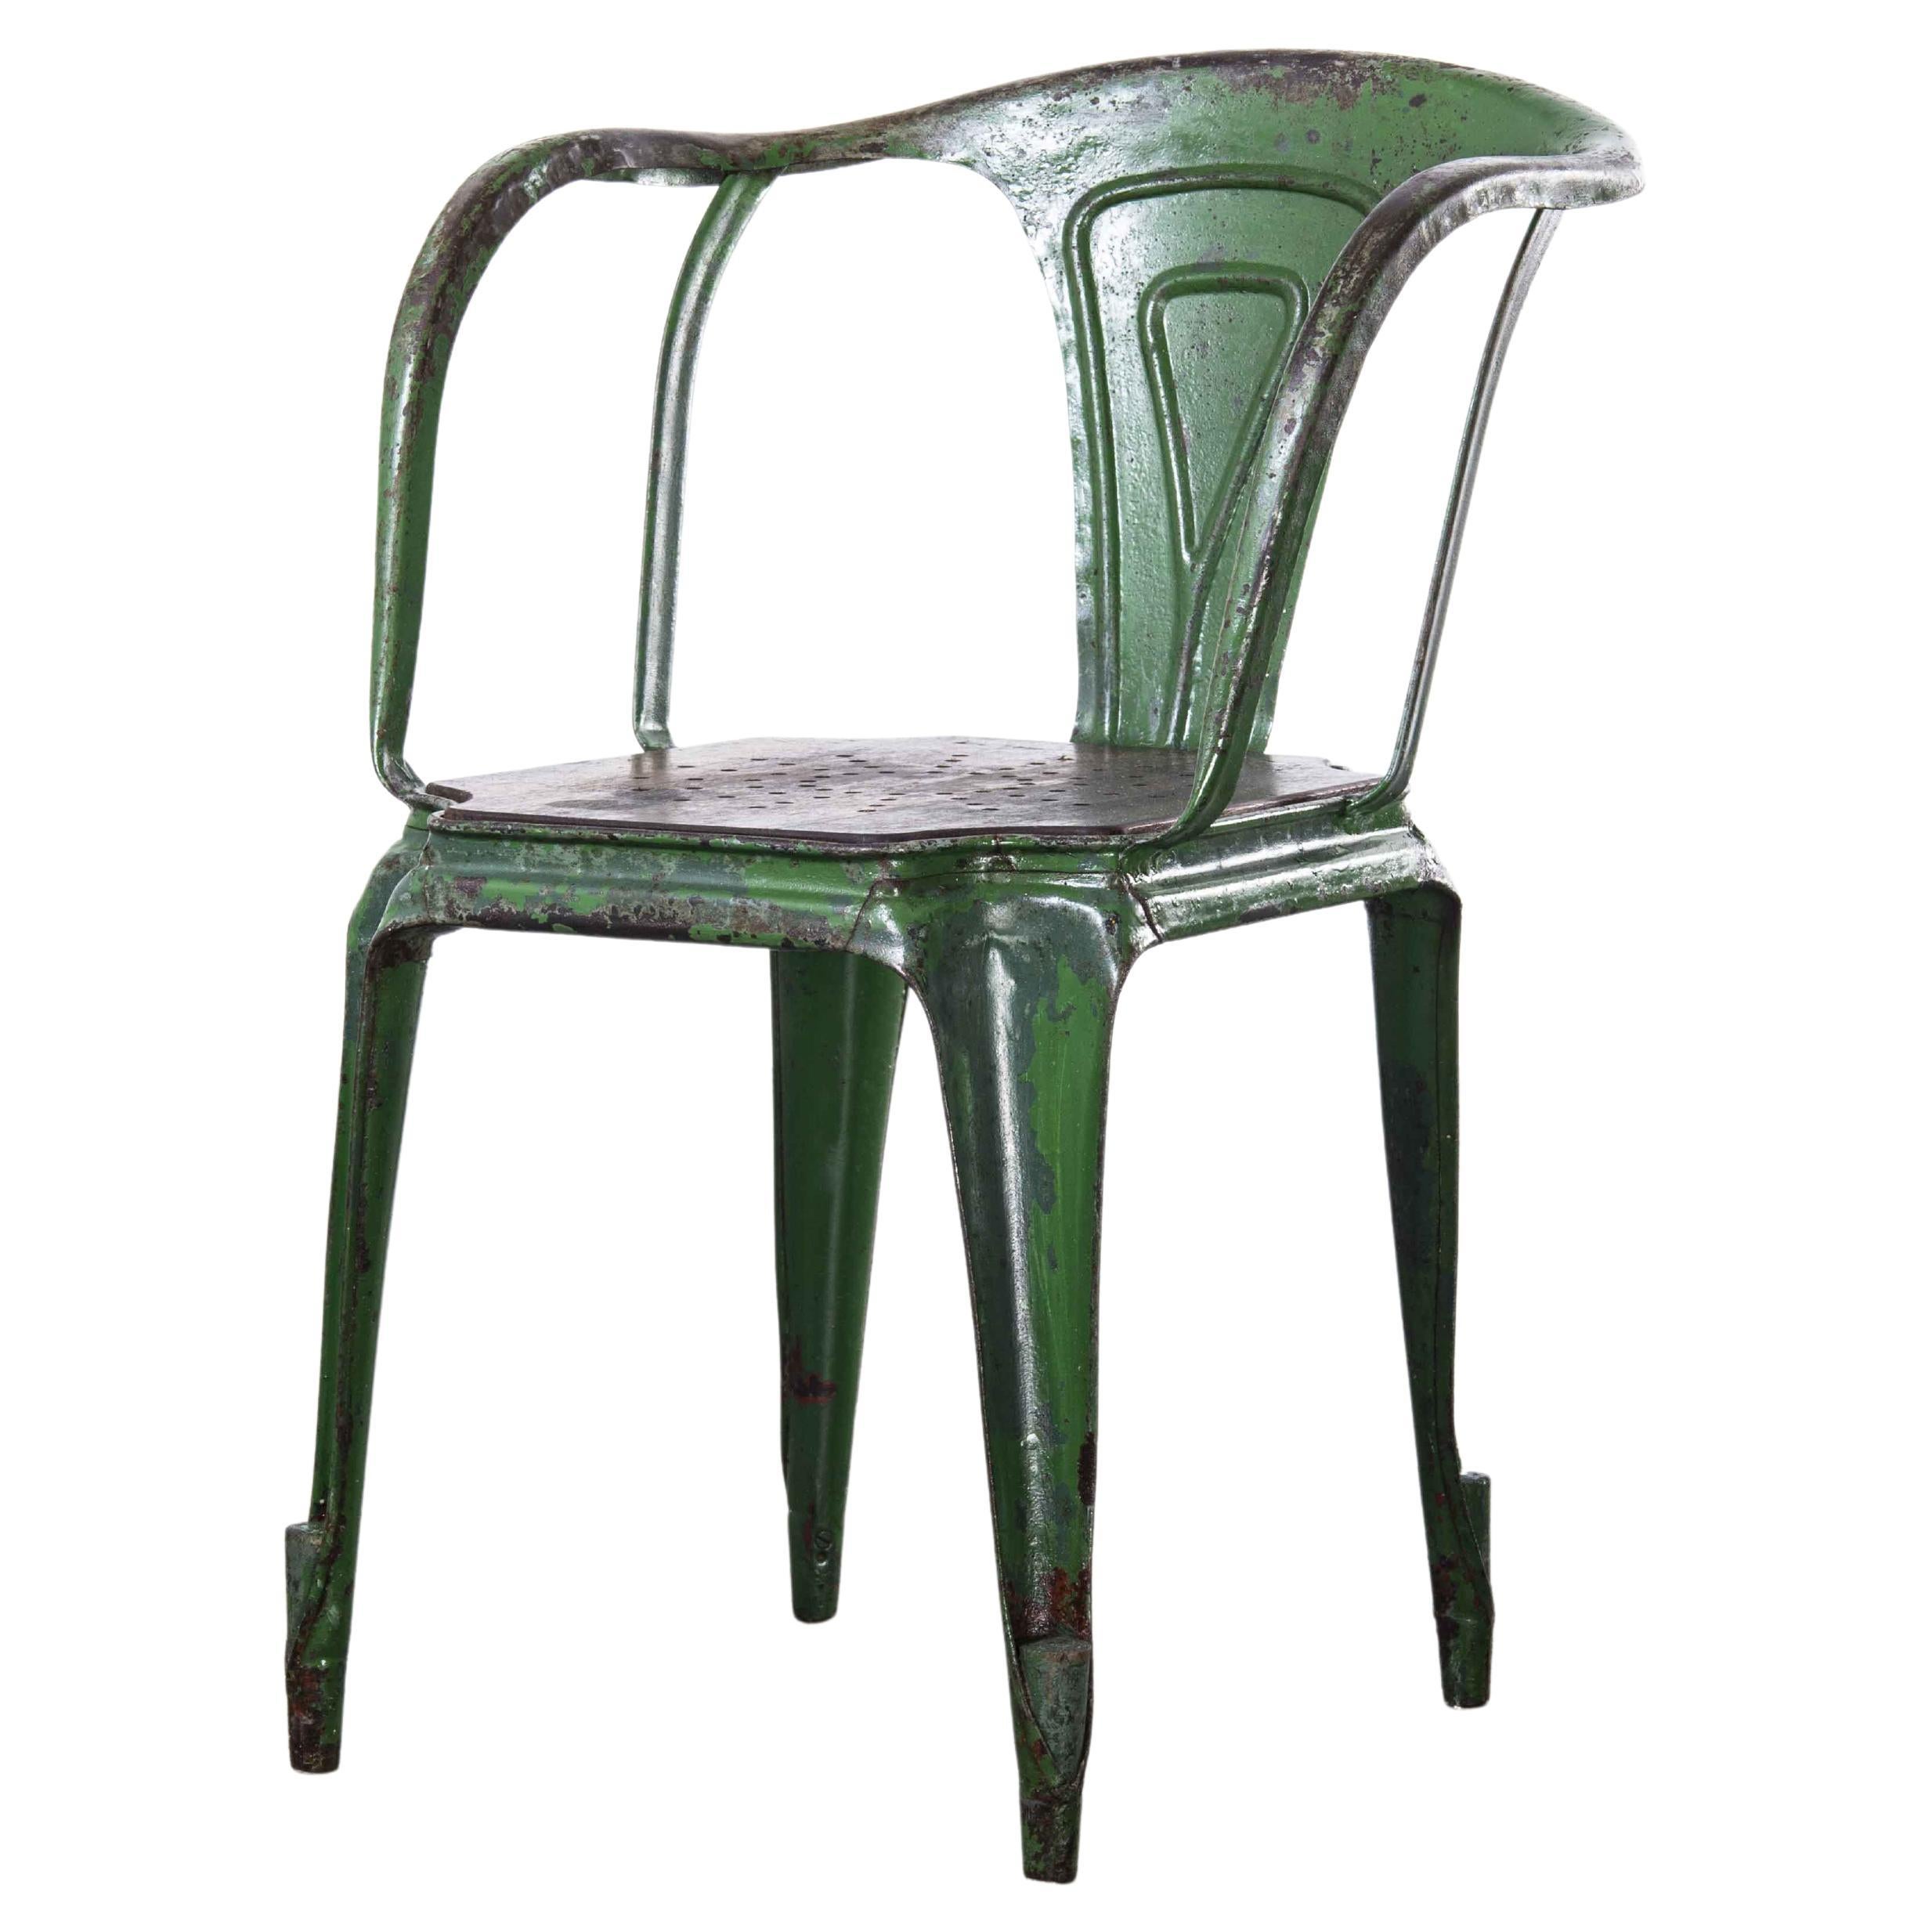 1940's Original French Multipl's Arm Chair, Green